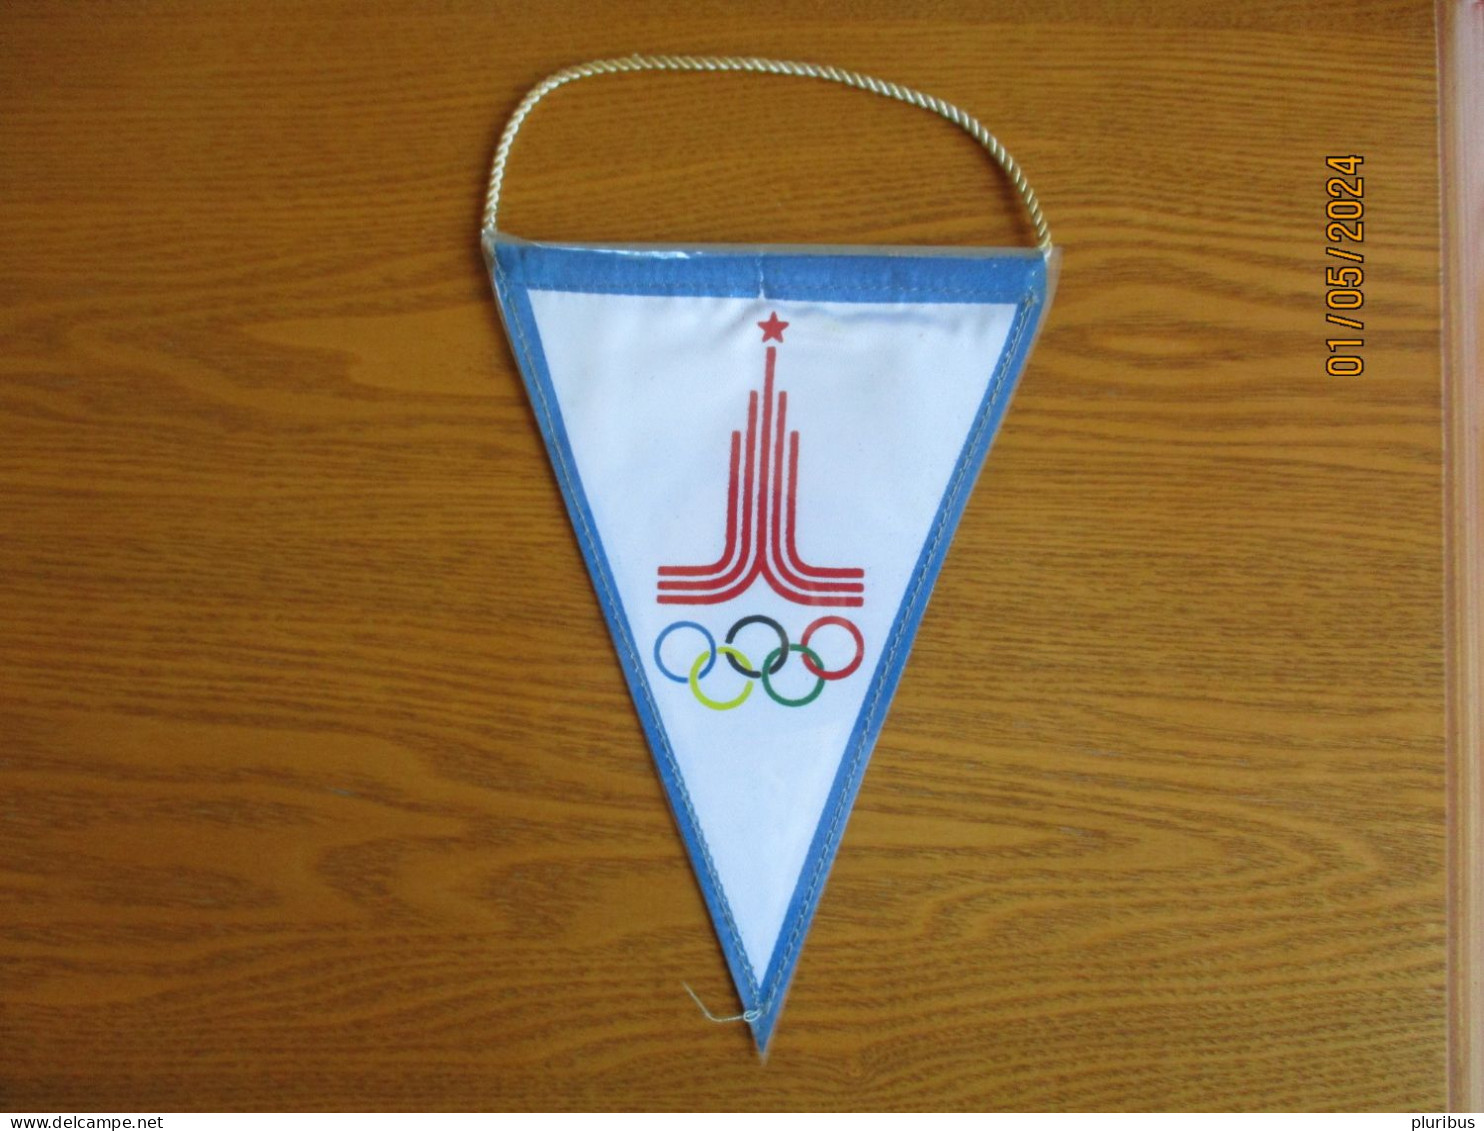 RUSSIA USSR 1980 MOSCOW OLYMPICS PENNANT - Apparel, Souvenirs & Other